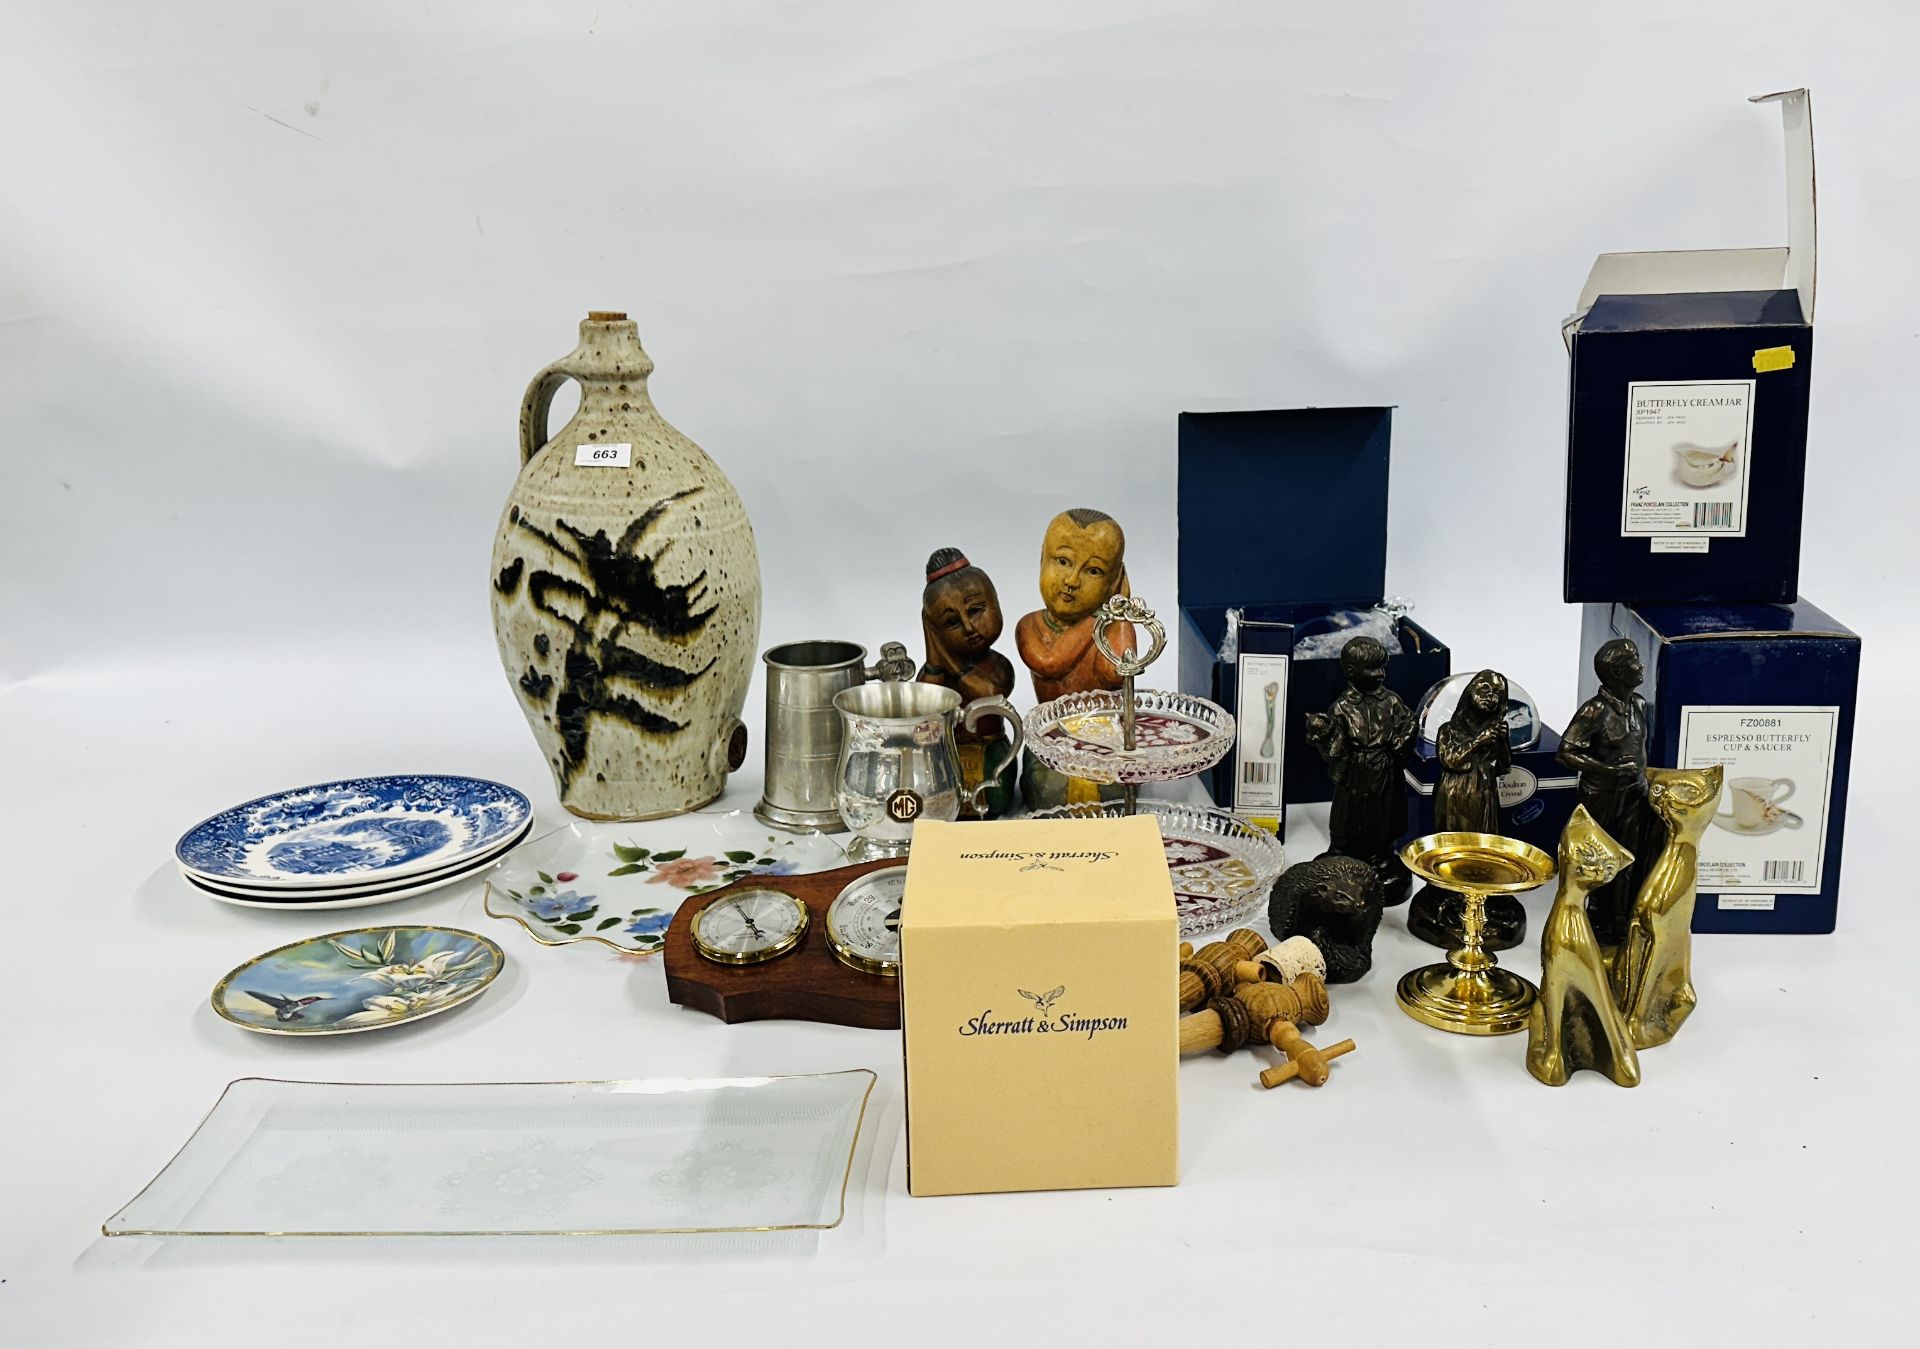 A GROUP OF ORNAMENTS AND COLLECTIBLE ITEMS TO INCLUDE STUDIO POTTERY FLASK, WOODEN ORNAMENTS, BRASS,